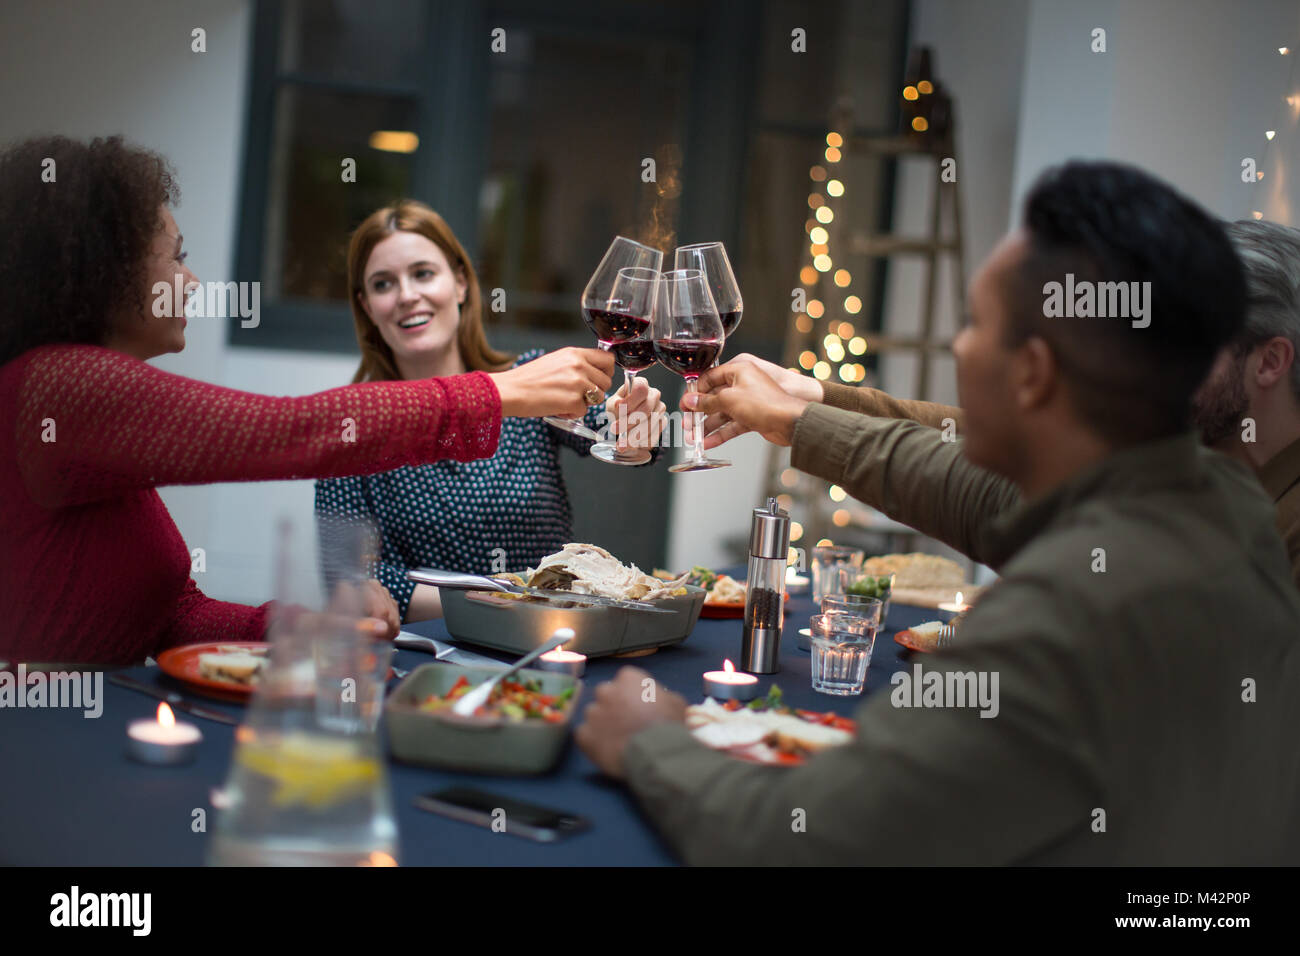 Friends celebrating Christmas together Stock Photo